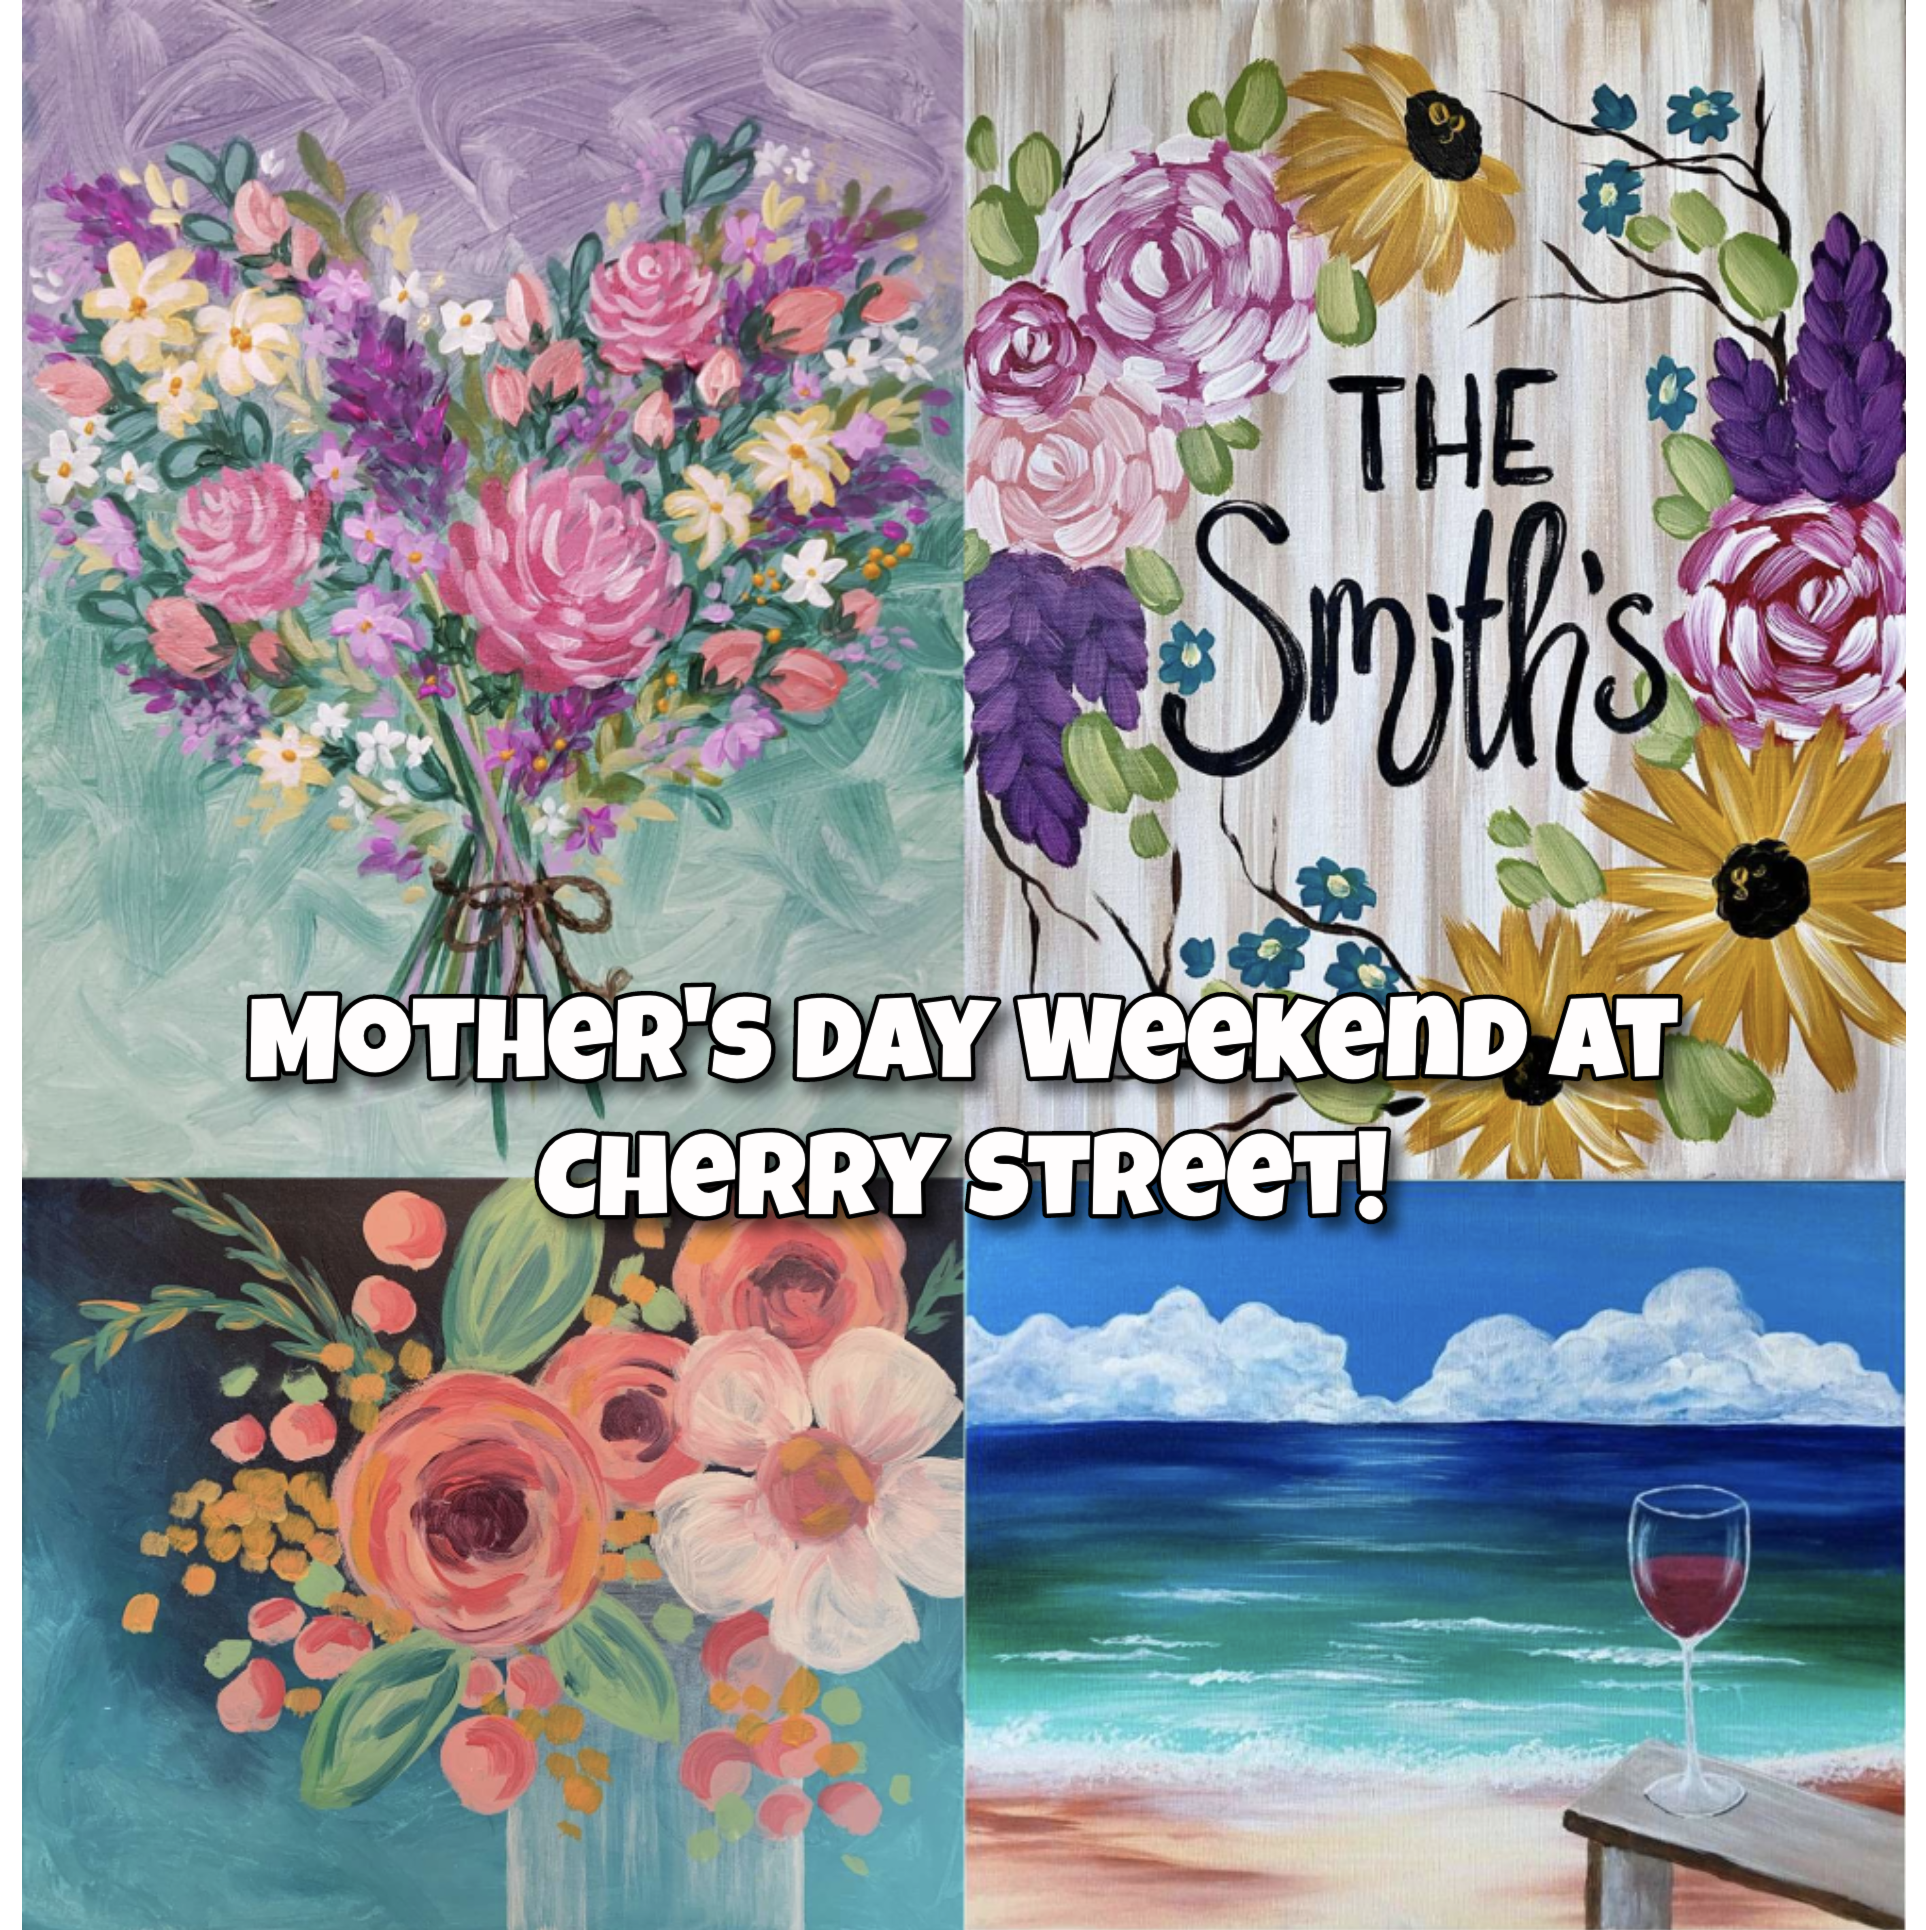 Mother's Day 2022 at Cherry Street!